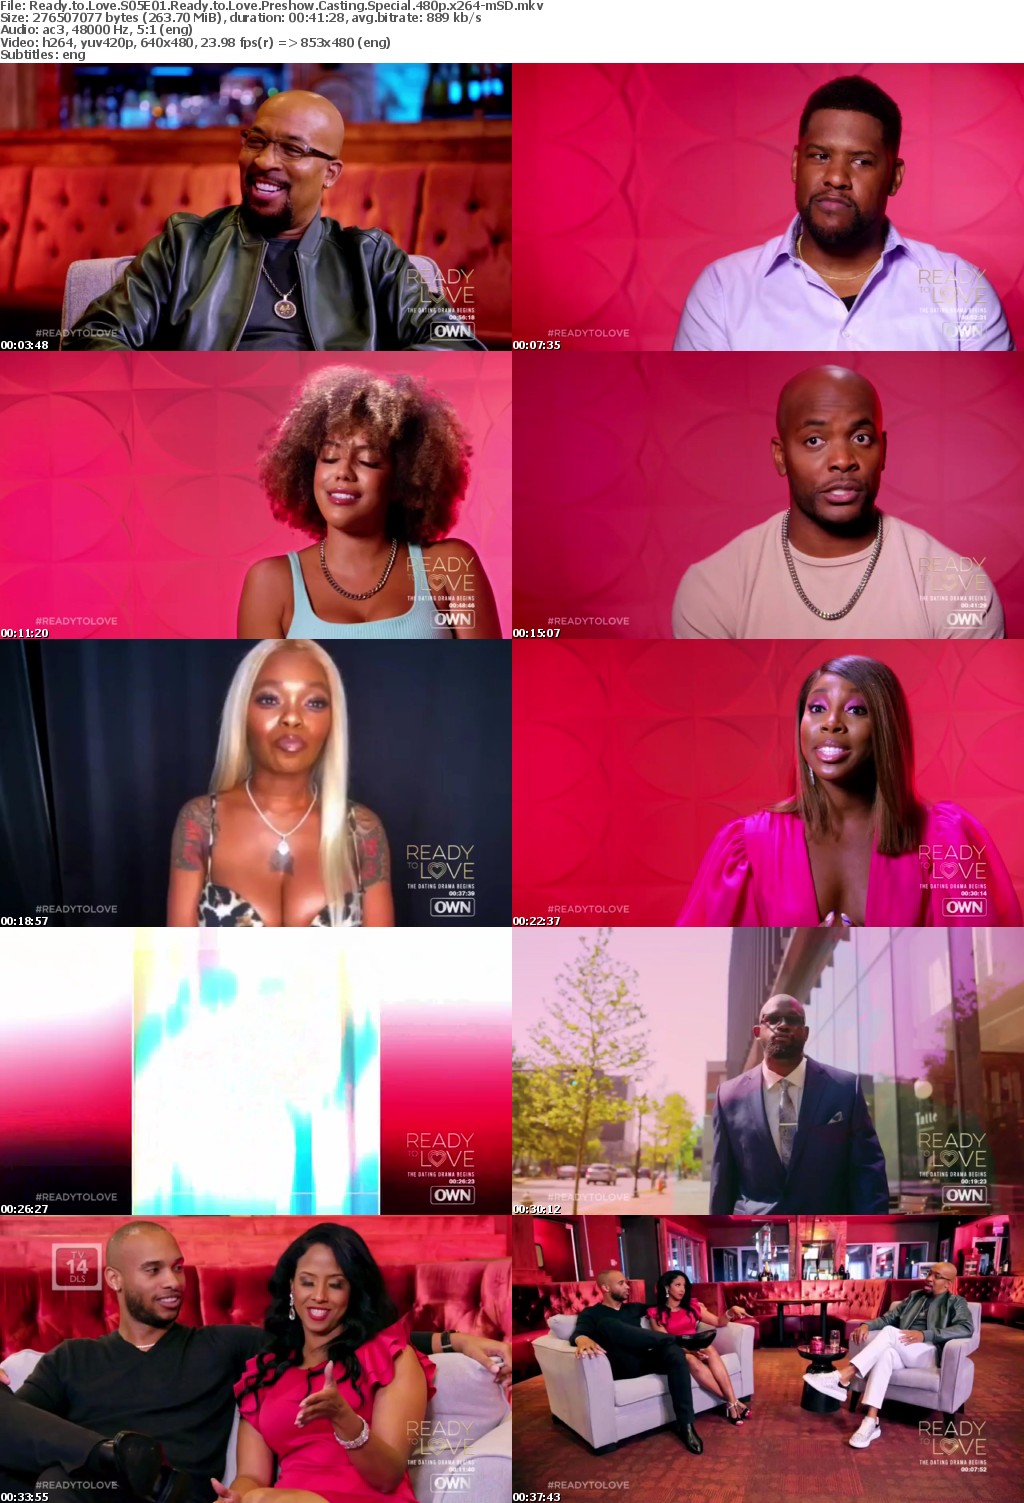 Ready to Love S05E01 Ready to Love Preshow Casting Special 480p x264-mSD